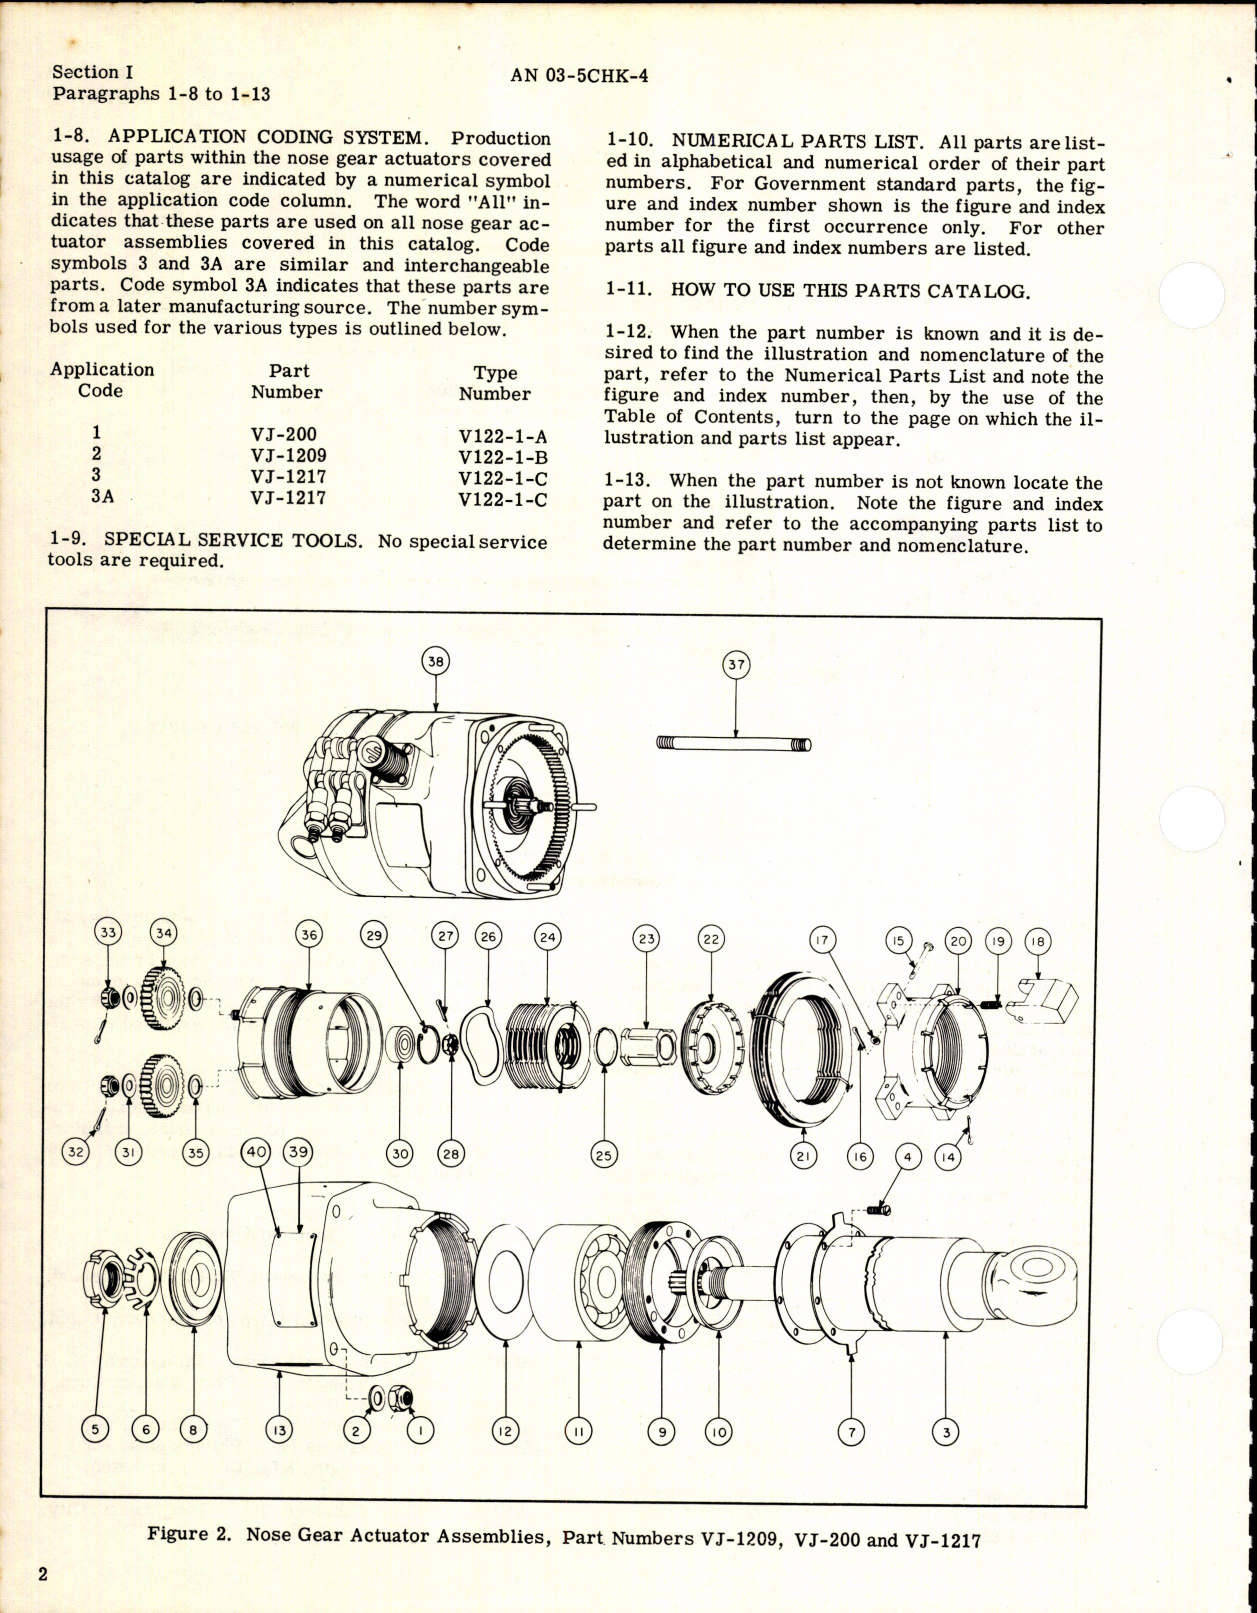 Sample page 4 from AirCorps Library document: Parts Catalog Nose Gear Actuator